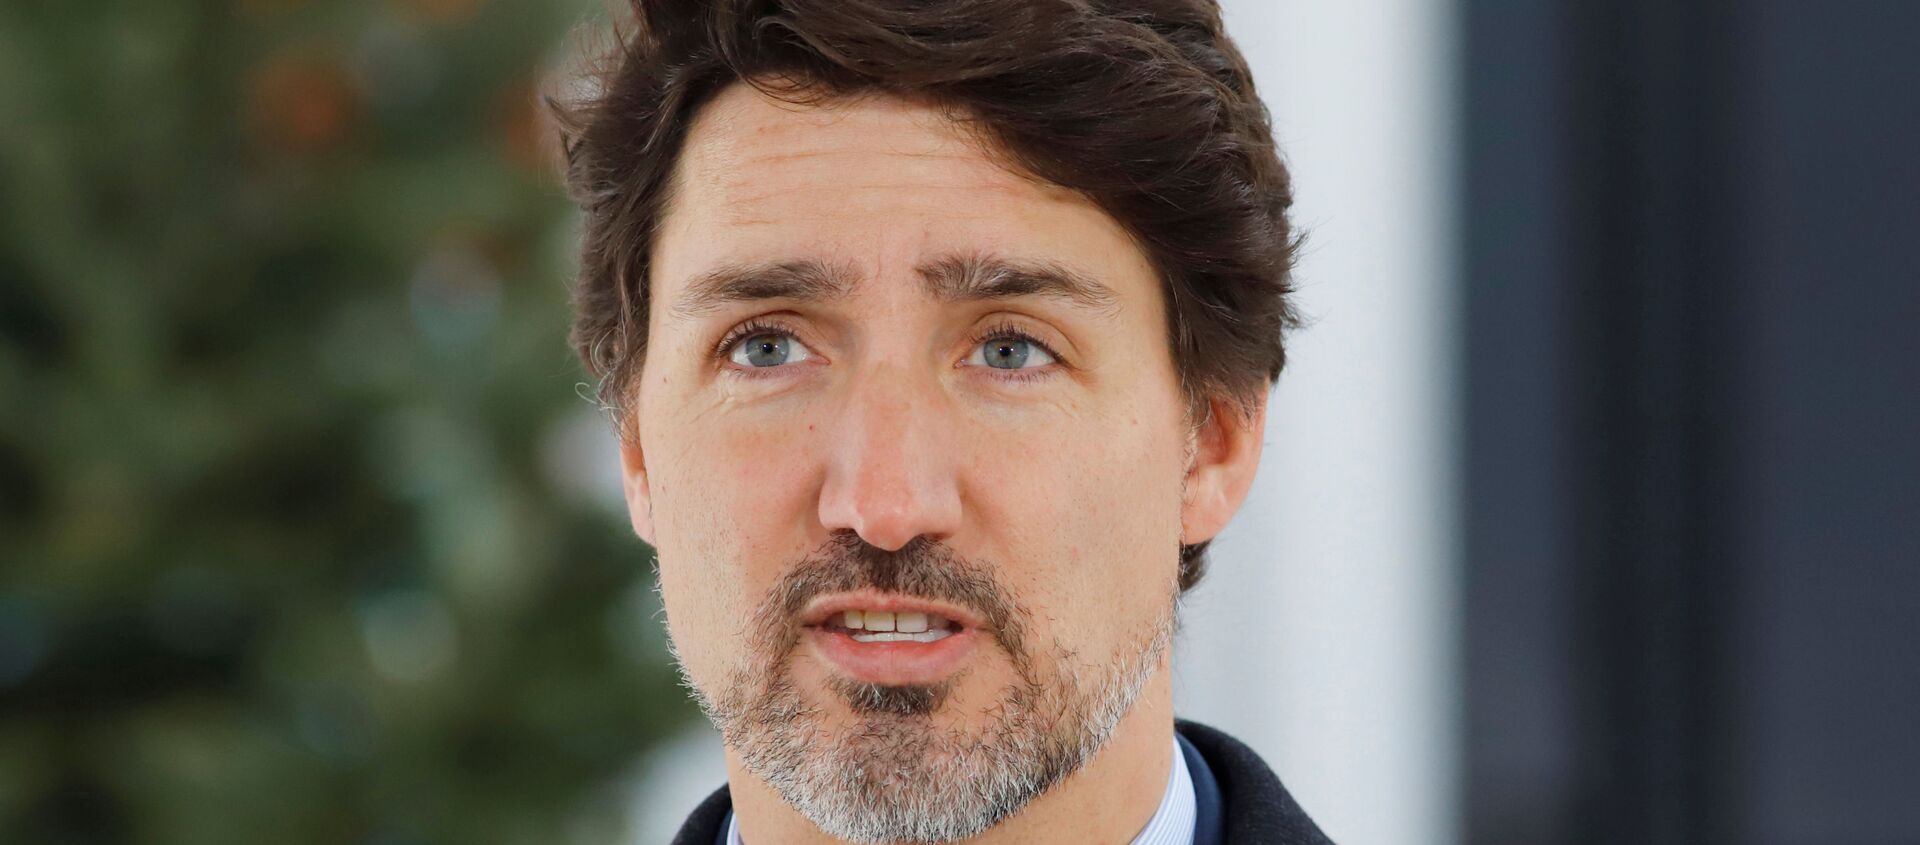 Canada's Prime Minister Justin Trudeau speaks to news media outside his home in Ottawa, Ontario, Canada March 25, 2020.  - Sputnik International, 1920, 26.03.2020